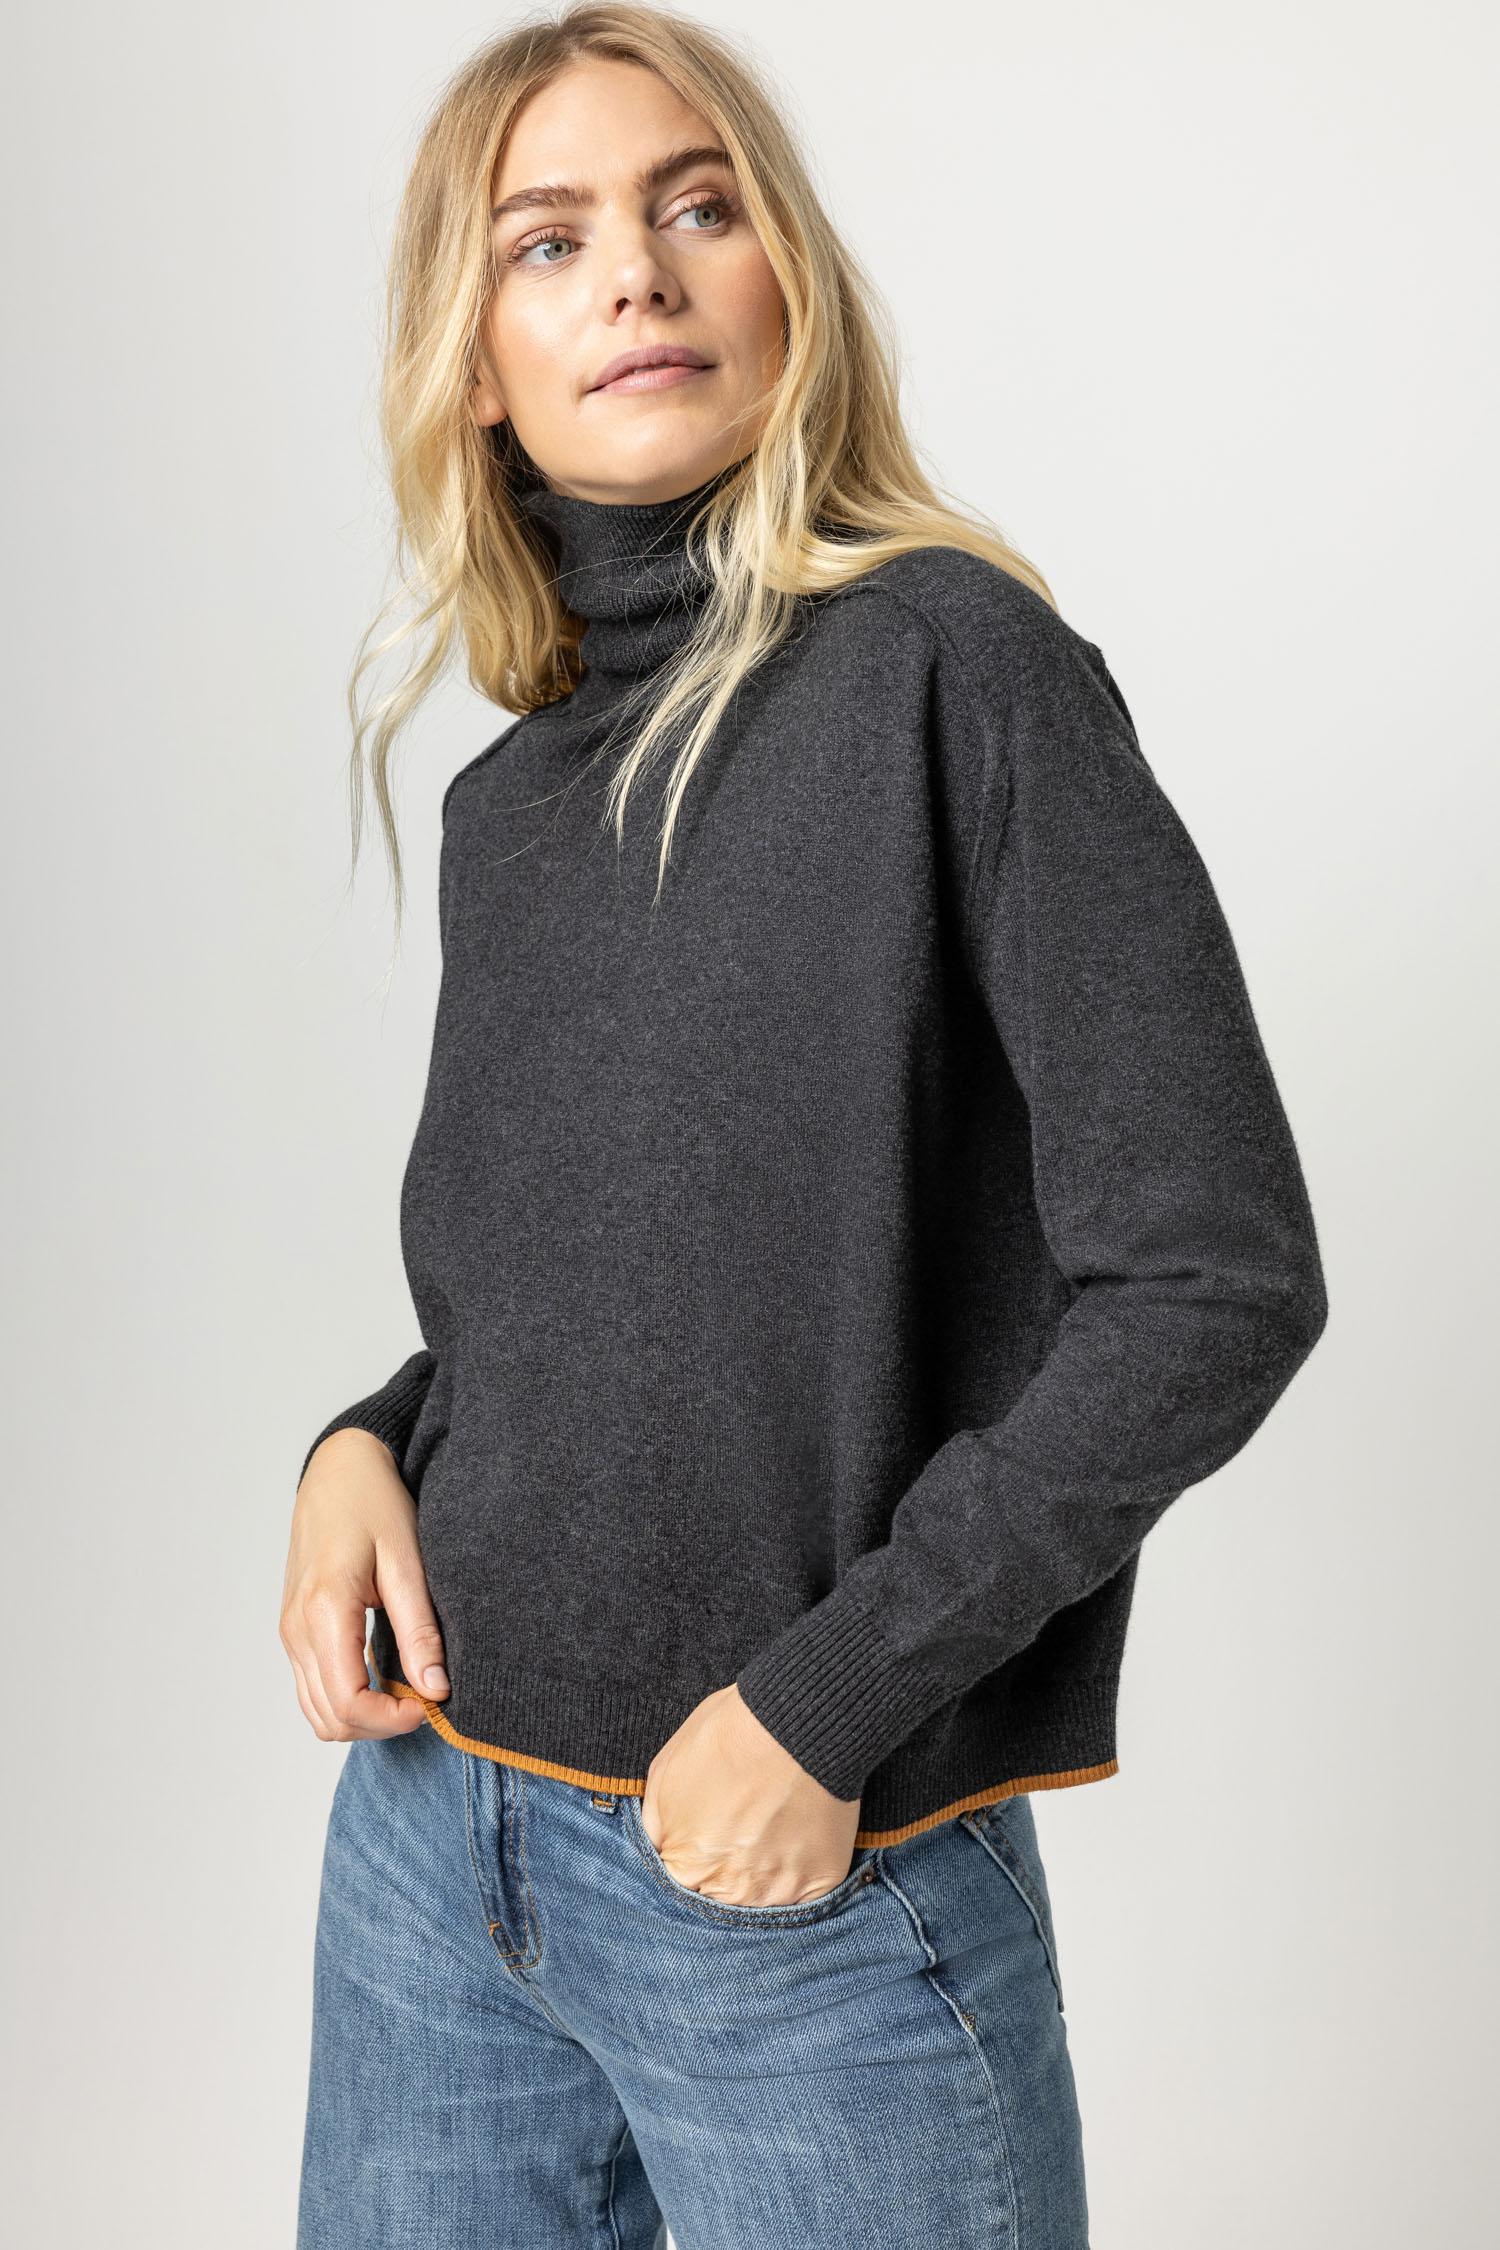 Lilla P - Easy Turtleneck Sweater with Tipping / Charcoal